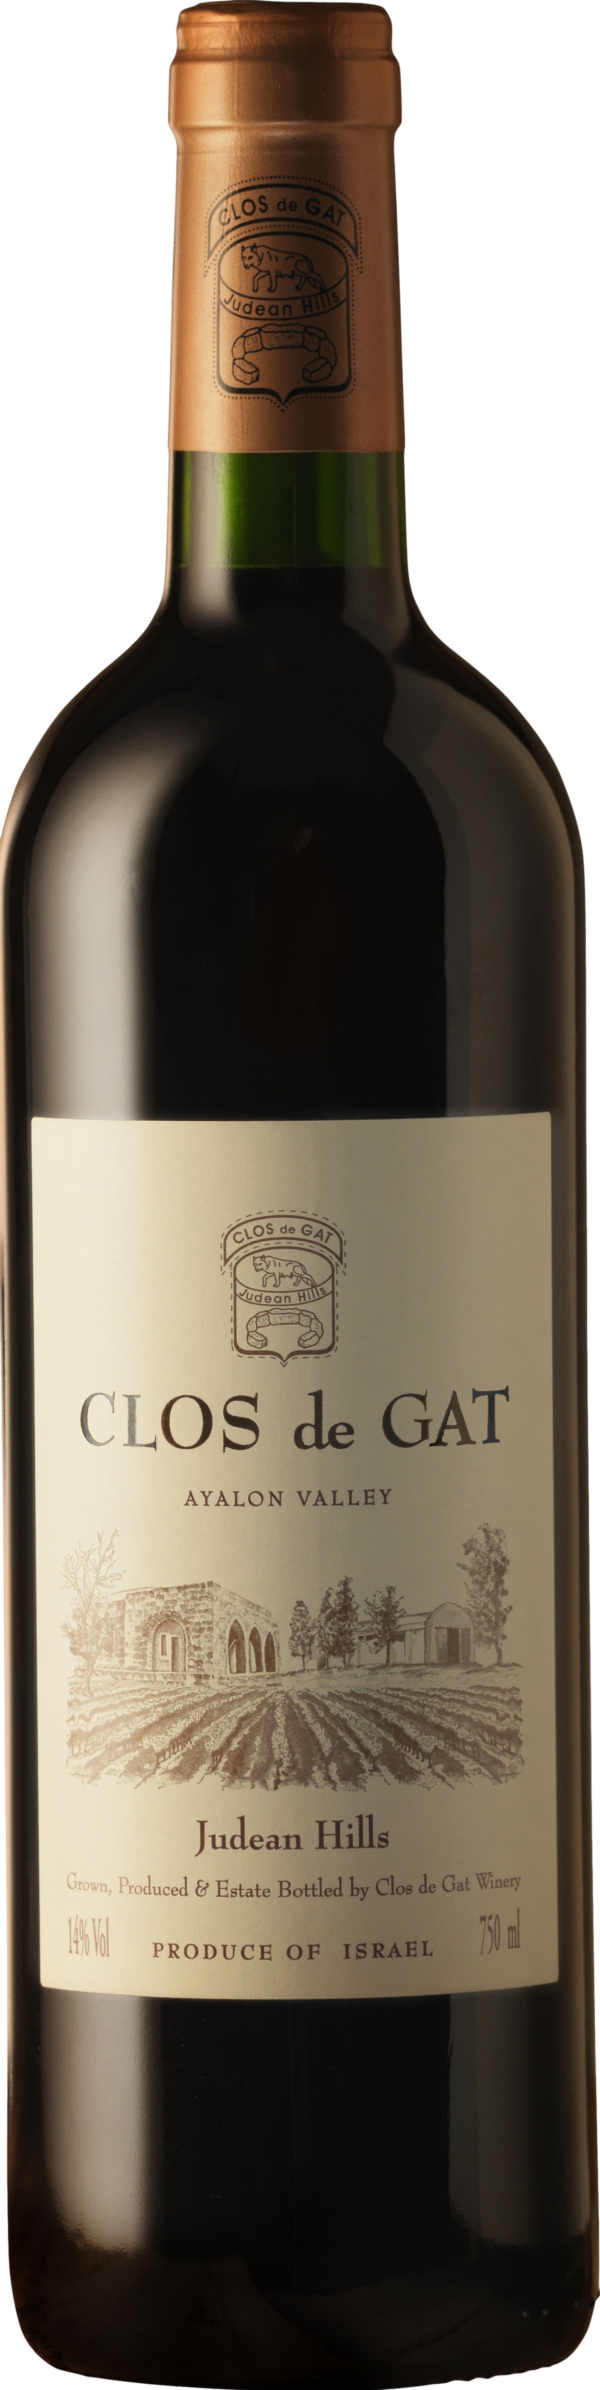 Product image of Clos de Gat Ayalon Valley 2016 from 8wines